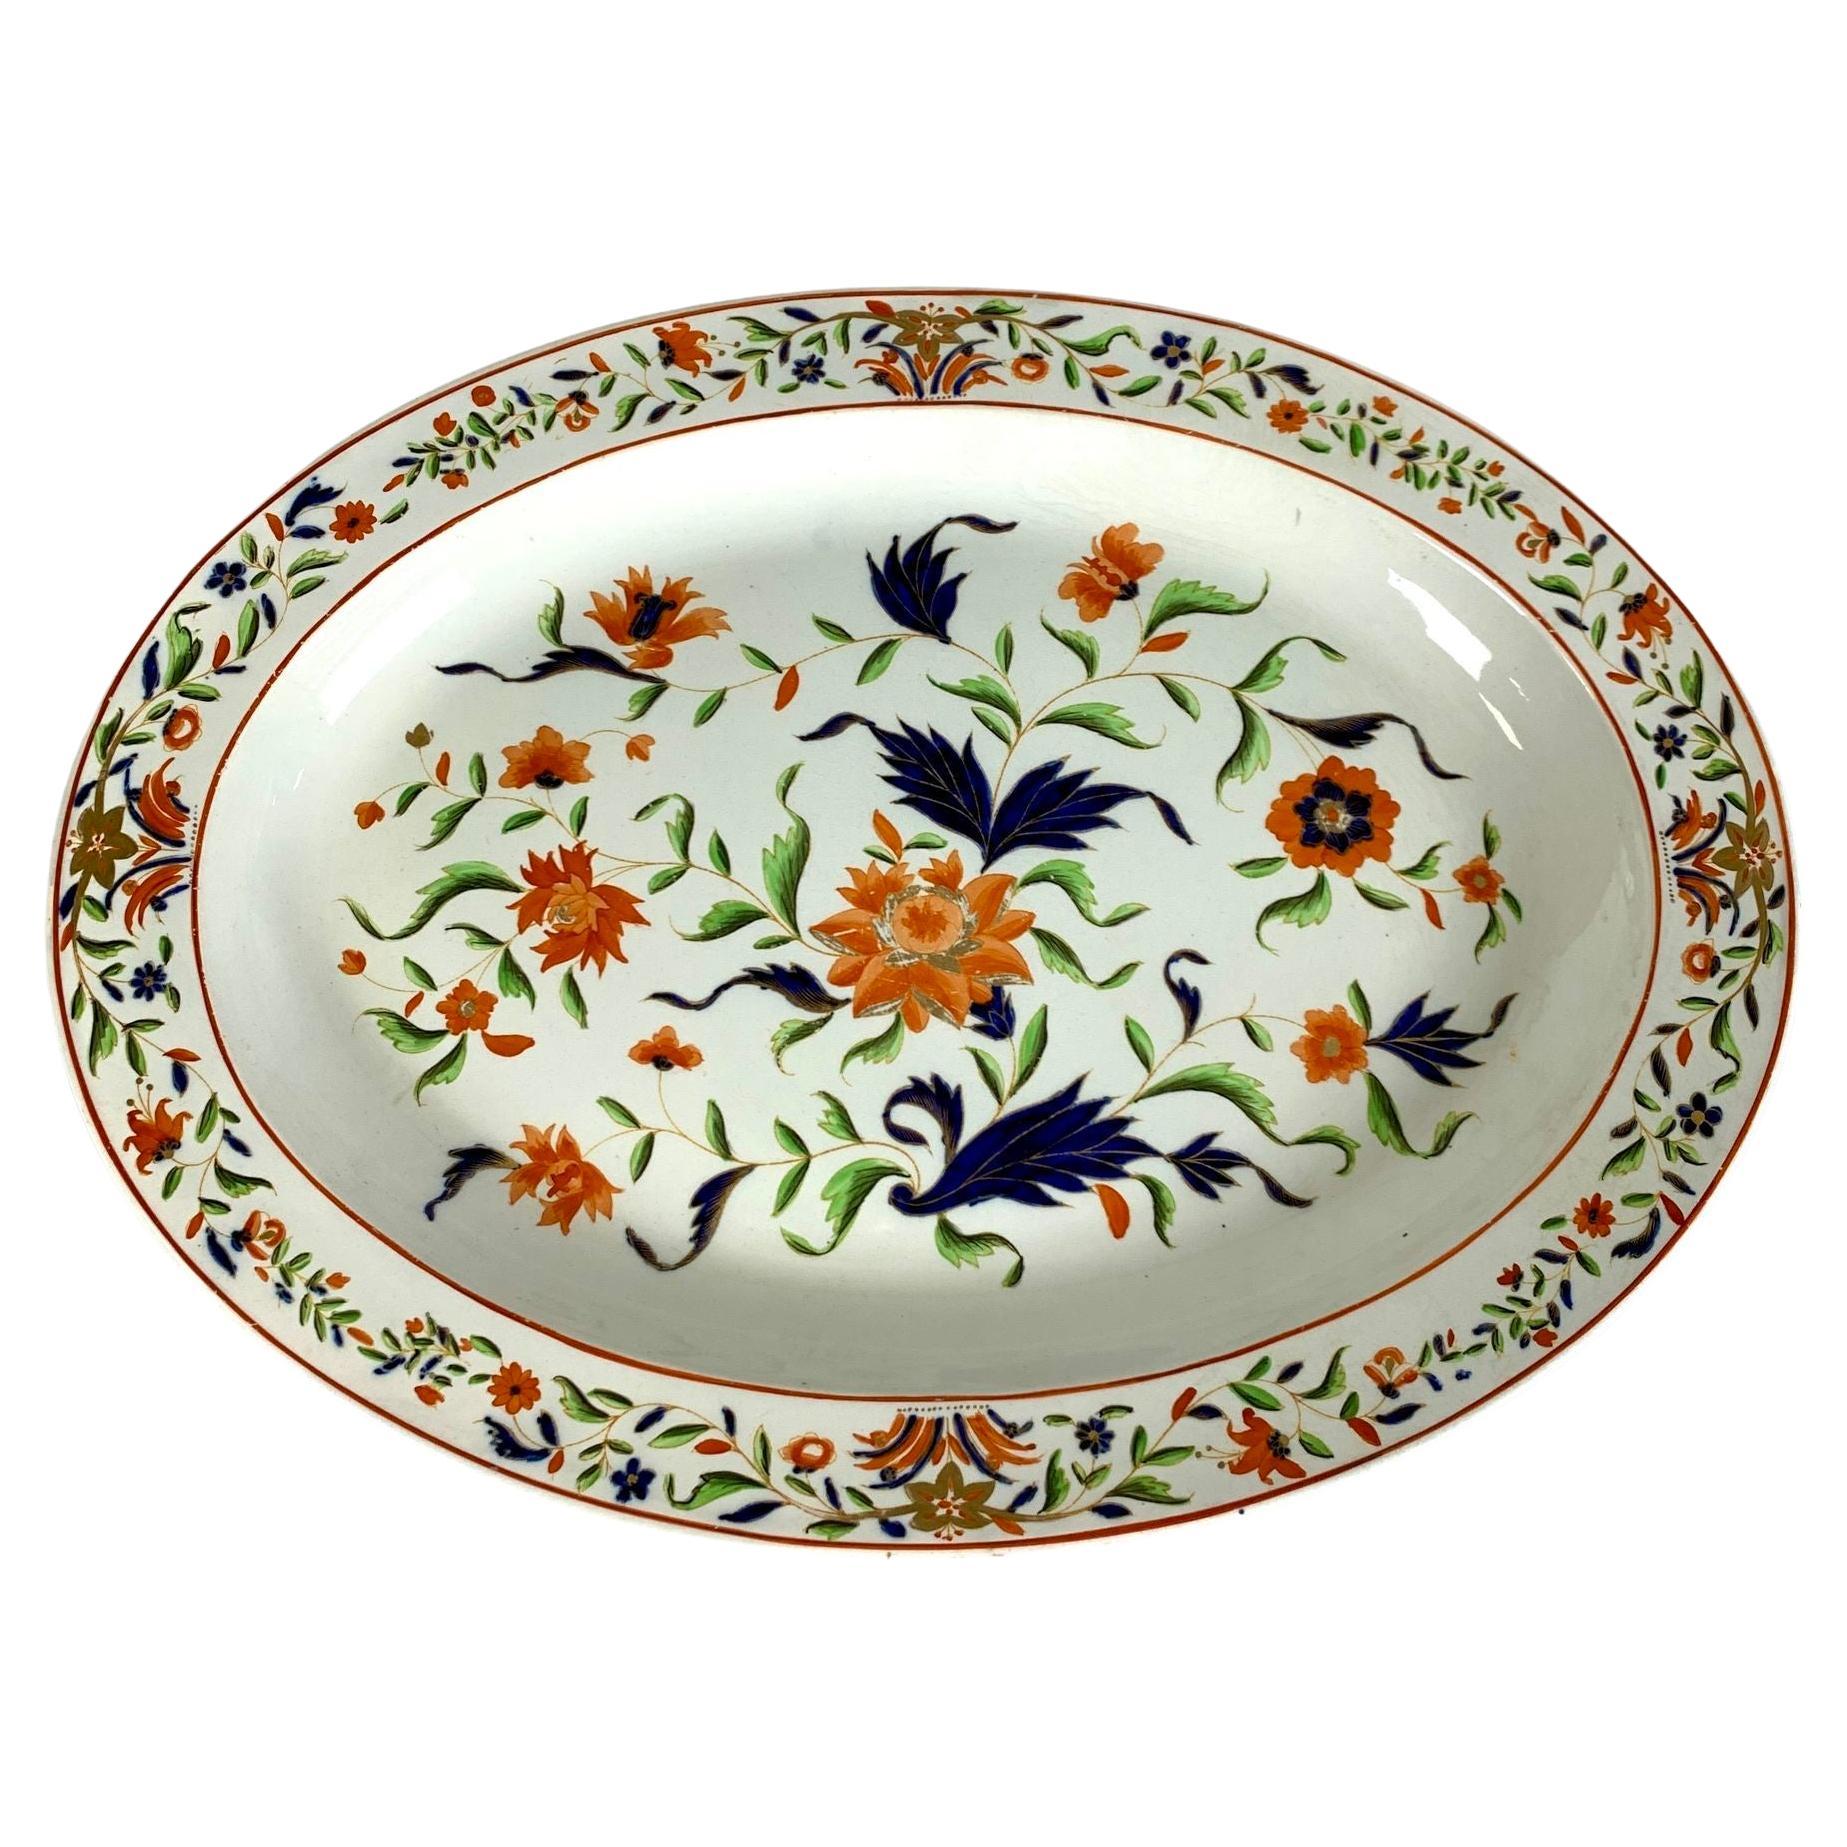 Large Wedgwood Platter Imari Colors with Floral Decorations England Circa 1840 For Sale